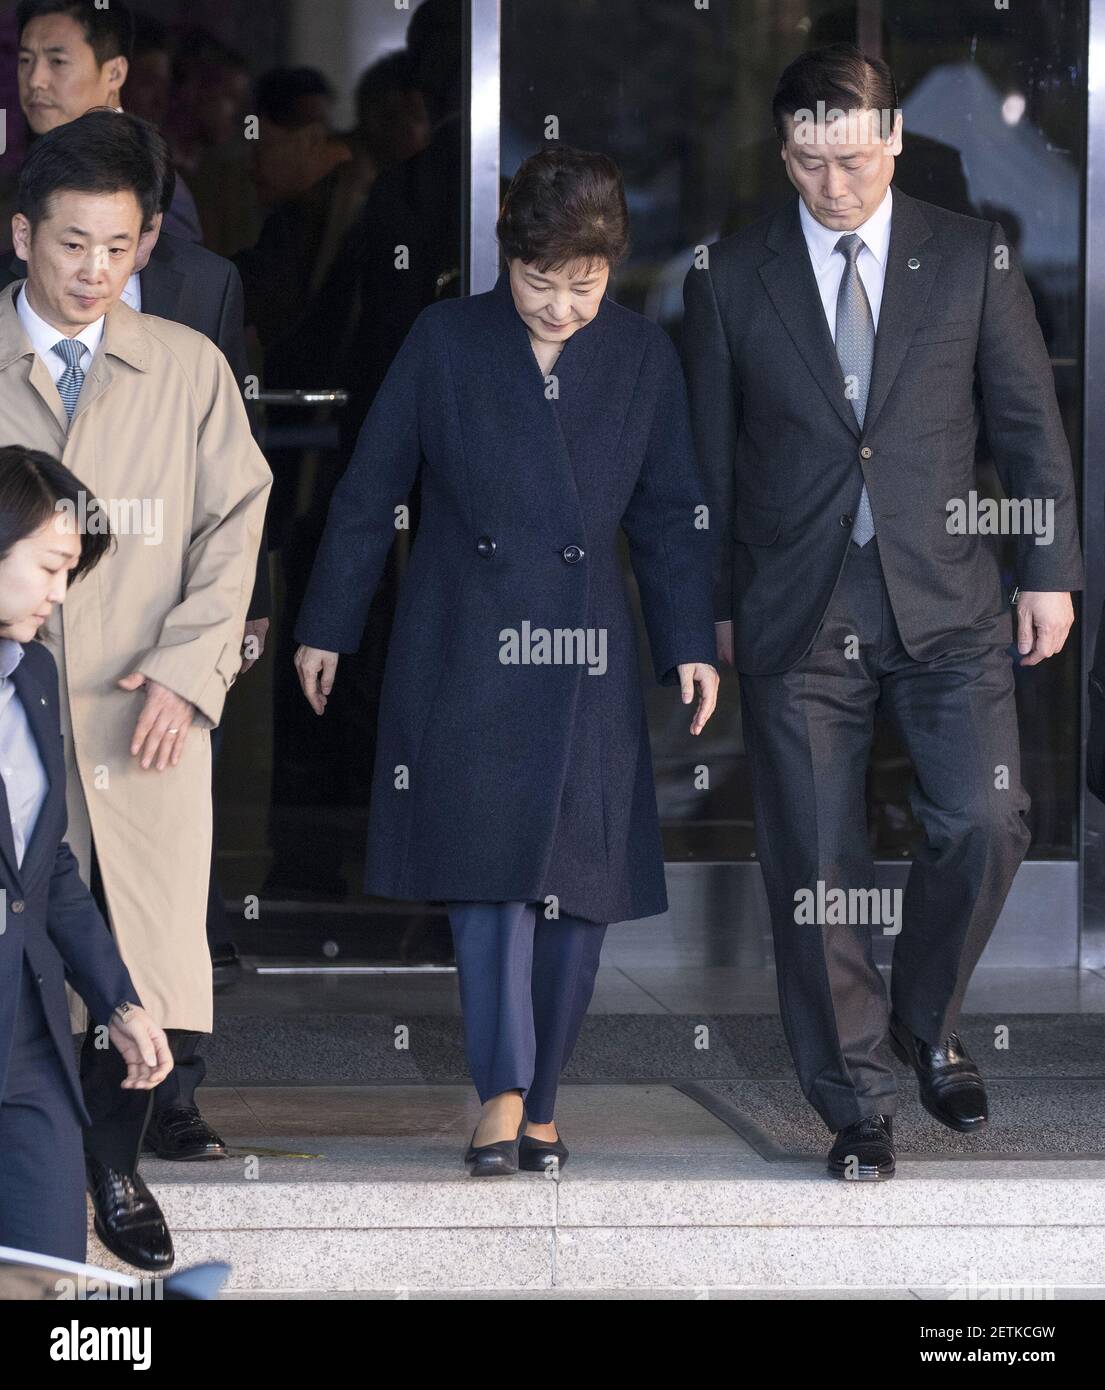 22 March 2017 - Seoul, South Korea : Former South Korean President Park Geun-hye, (center), leaves the prosecutors office in Seoul, South Korea on Wednesday, March 22, 2017. Park is set to be questioned by prosecutors for the first time over a corruption scandal that ended her presidency. Ousted South Korean leader Park Geun-hye pledged to cooperate with investigators before facing hours of questioning for the first time over a corruption scandal that ended her presidency. Photo Credit: Lee Young-ho/Pool *** Please Use Credit from Credit Field *** Stock Photo